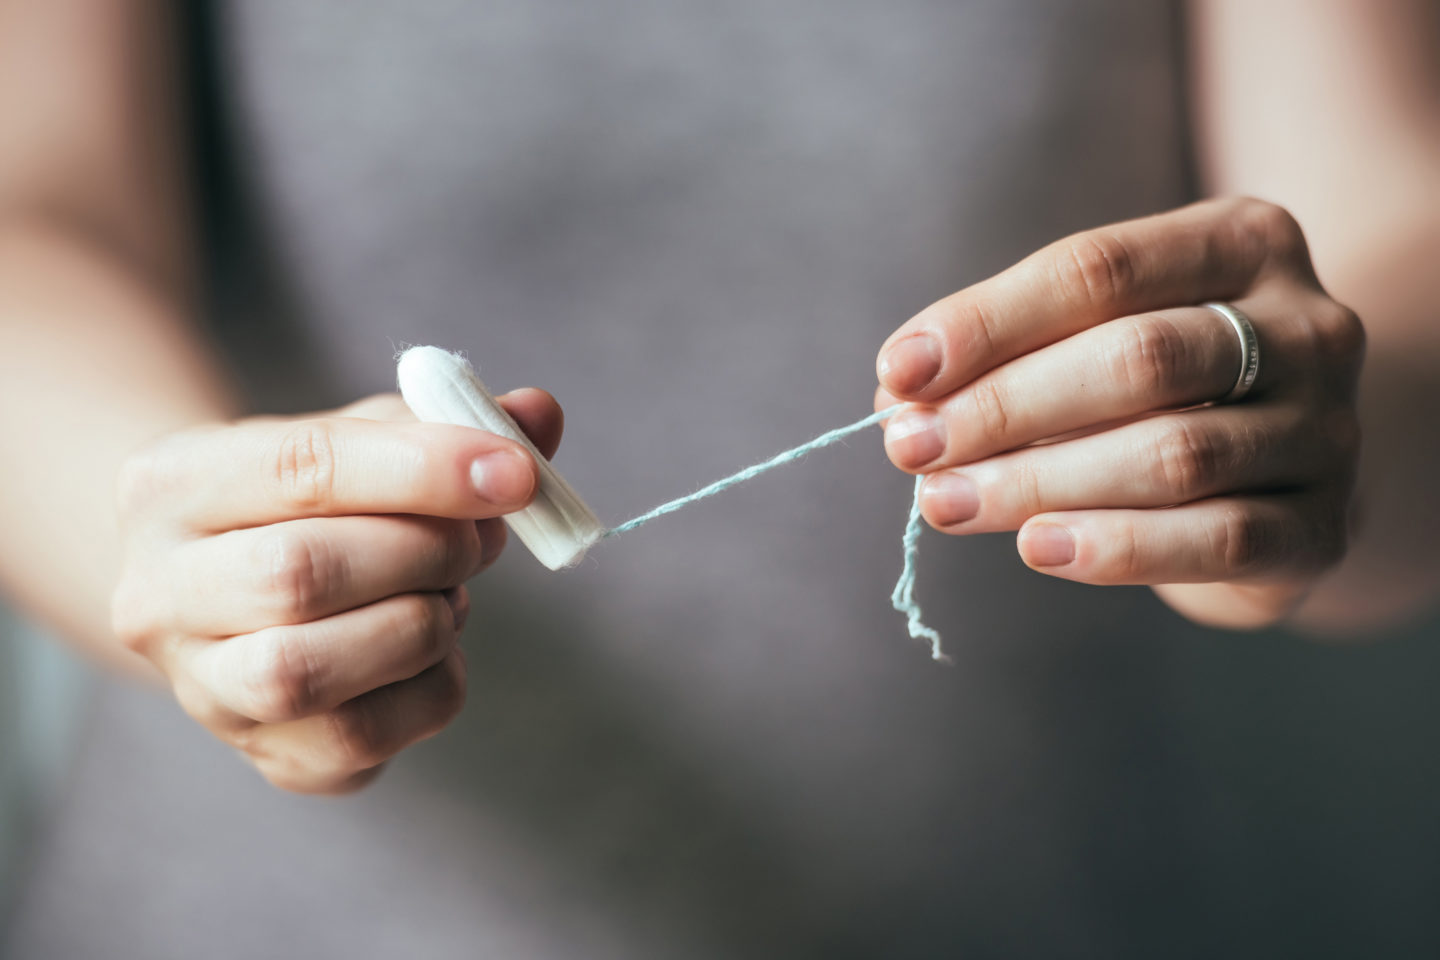 My Fear of Using Tampons Made Me Feel Ashamed